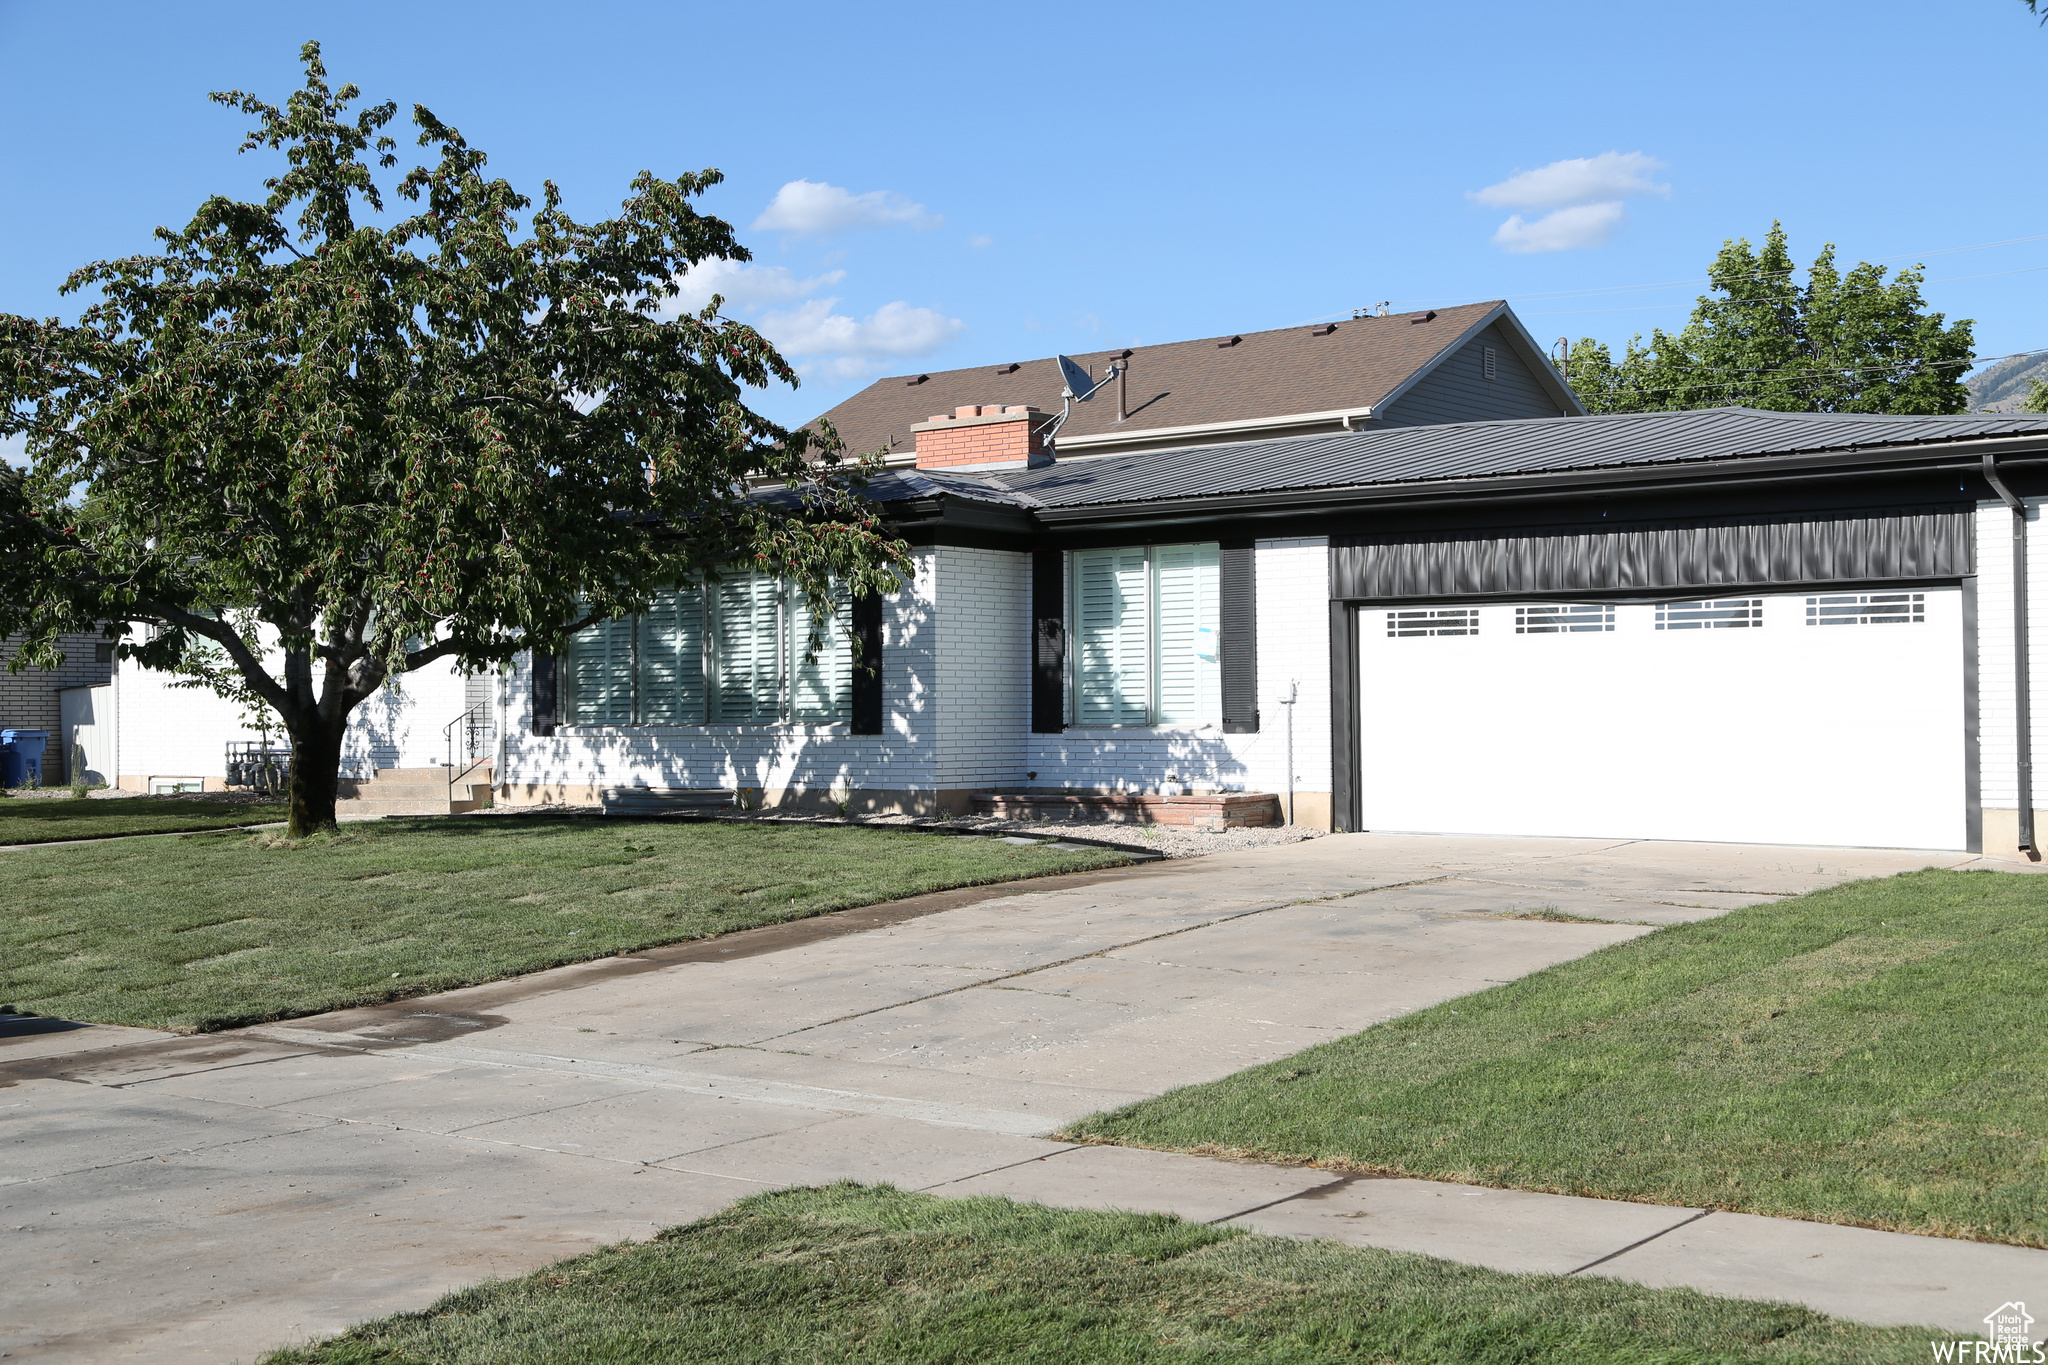 View of front of property with a garage and a front lawn